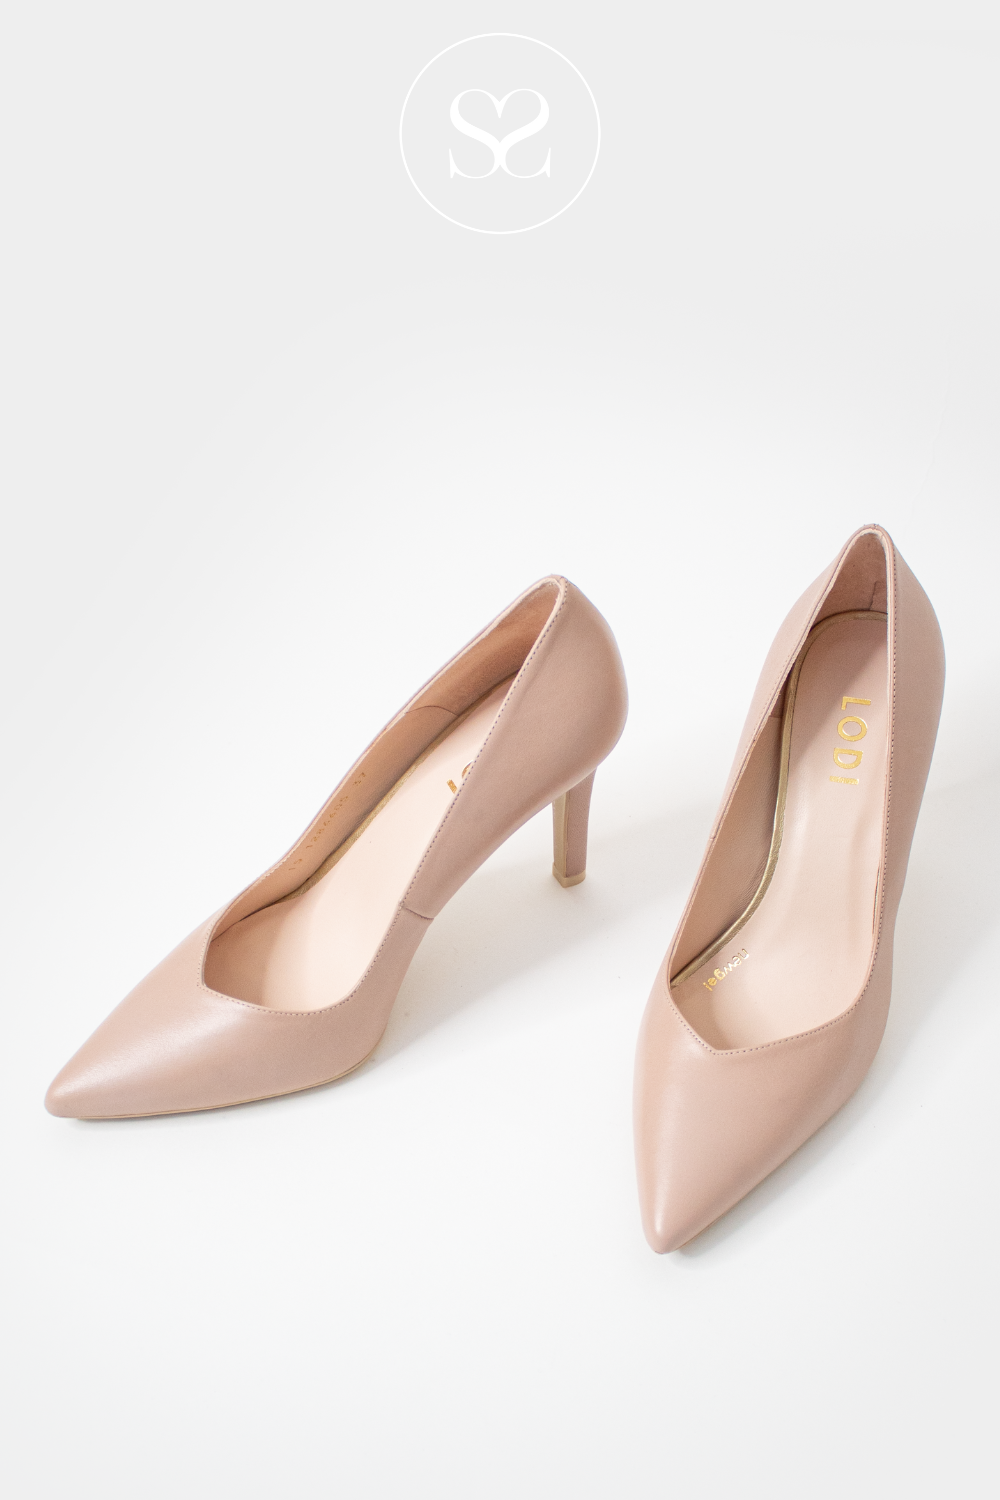 LODI RABOT NUDE LEATHER COURT SHOE HIGH STILETTO HEEL WITH POINTED TOE